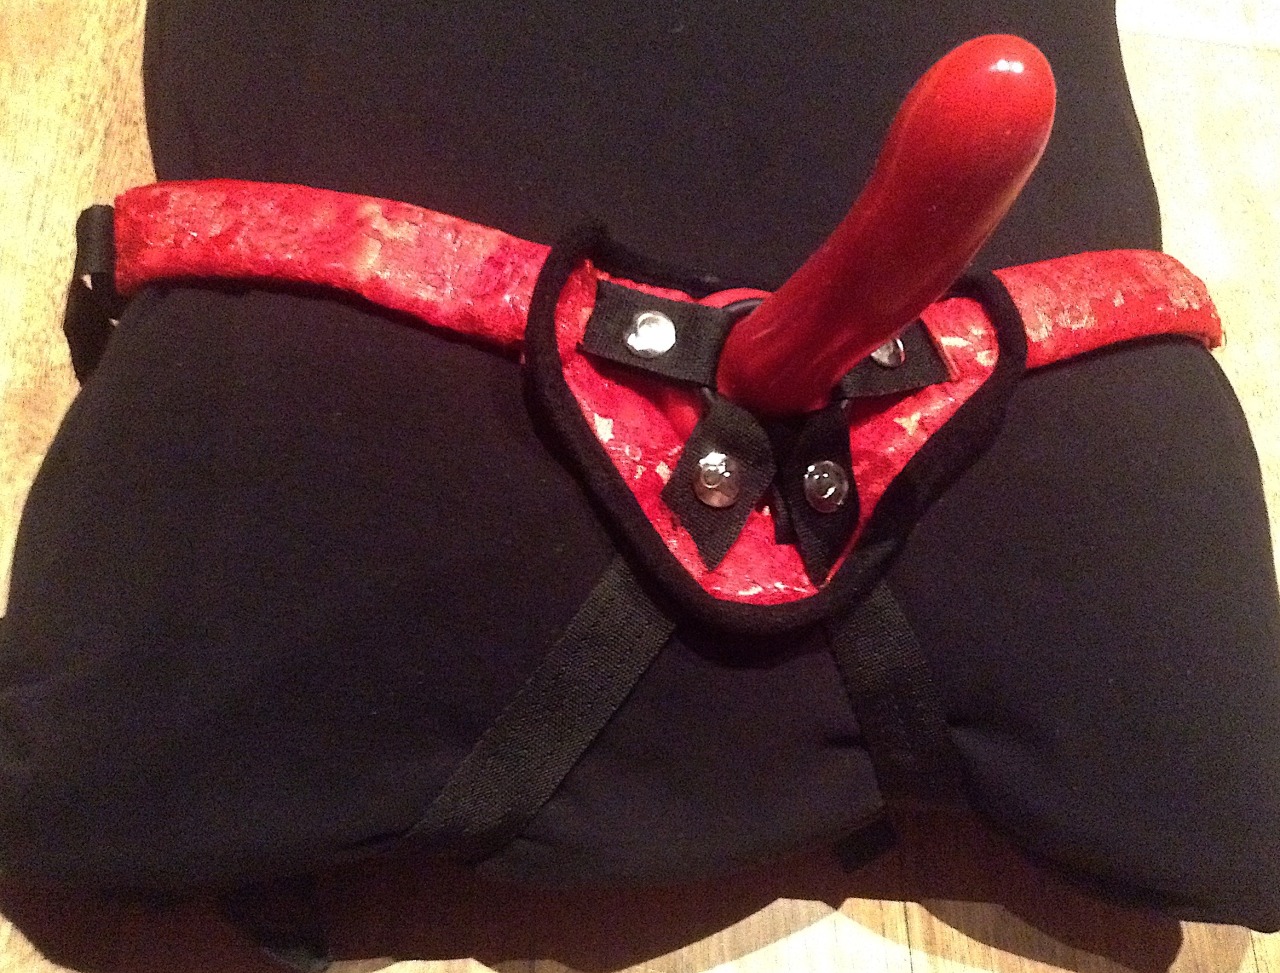 Pillow Princess Reviews — Red Alert a review of the Sportsheets Red Lace... pic